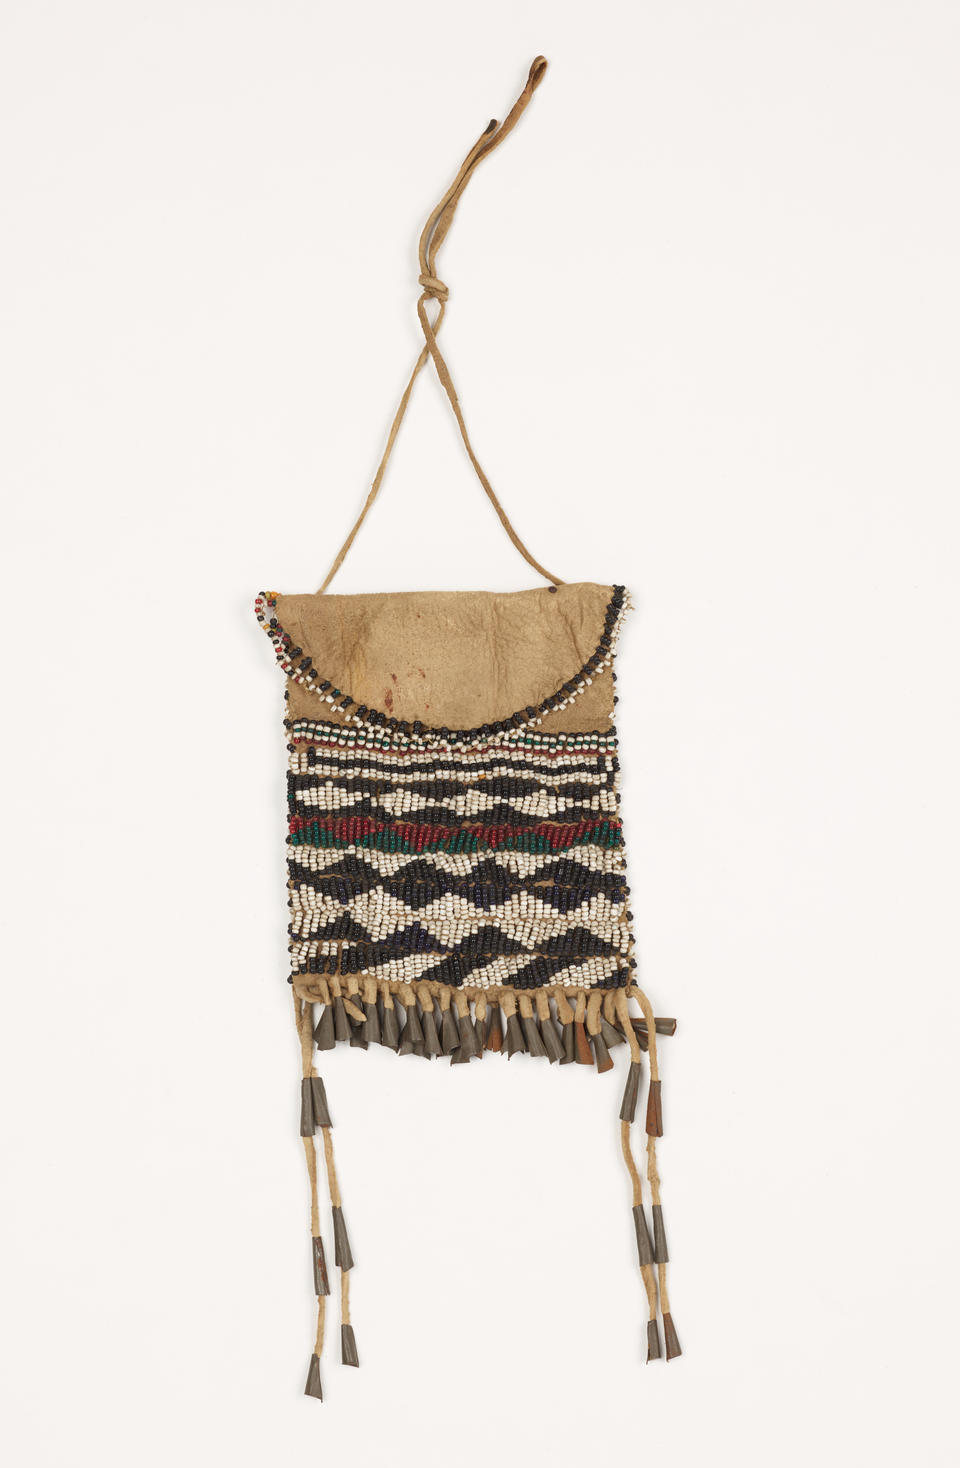 A leather beaded pouch with white, black, red, and green beaded designs. There is a handle as well as fringes with metal and leather decorations.